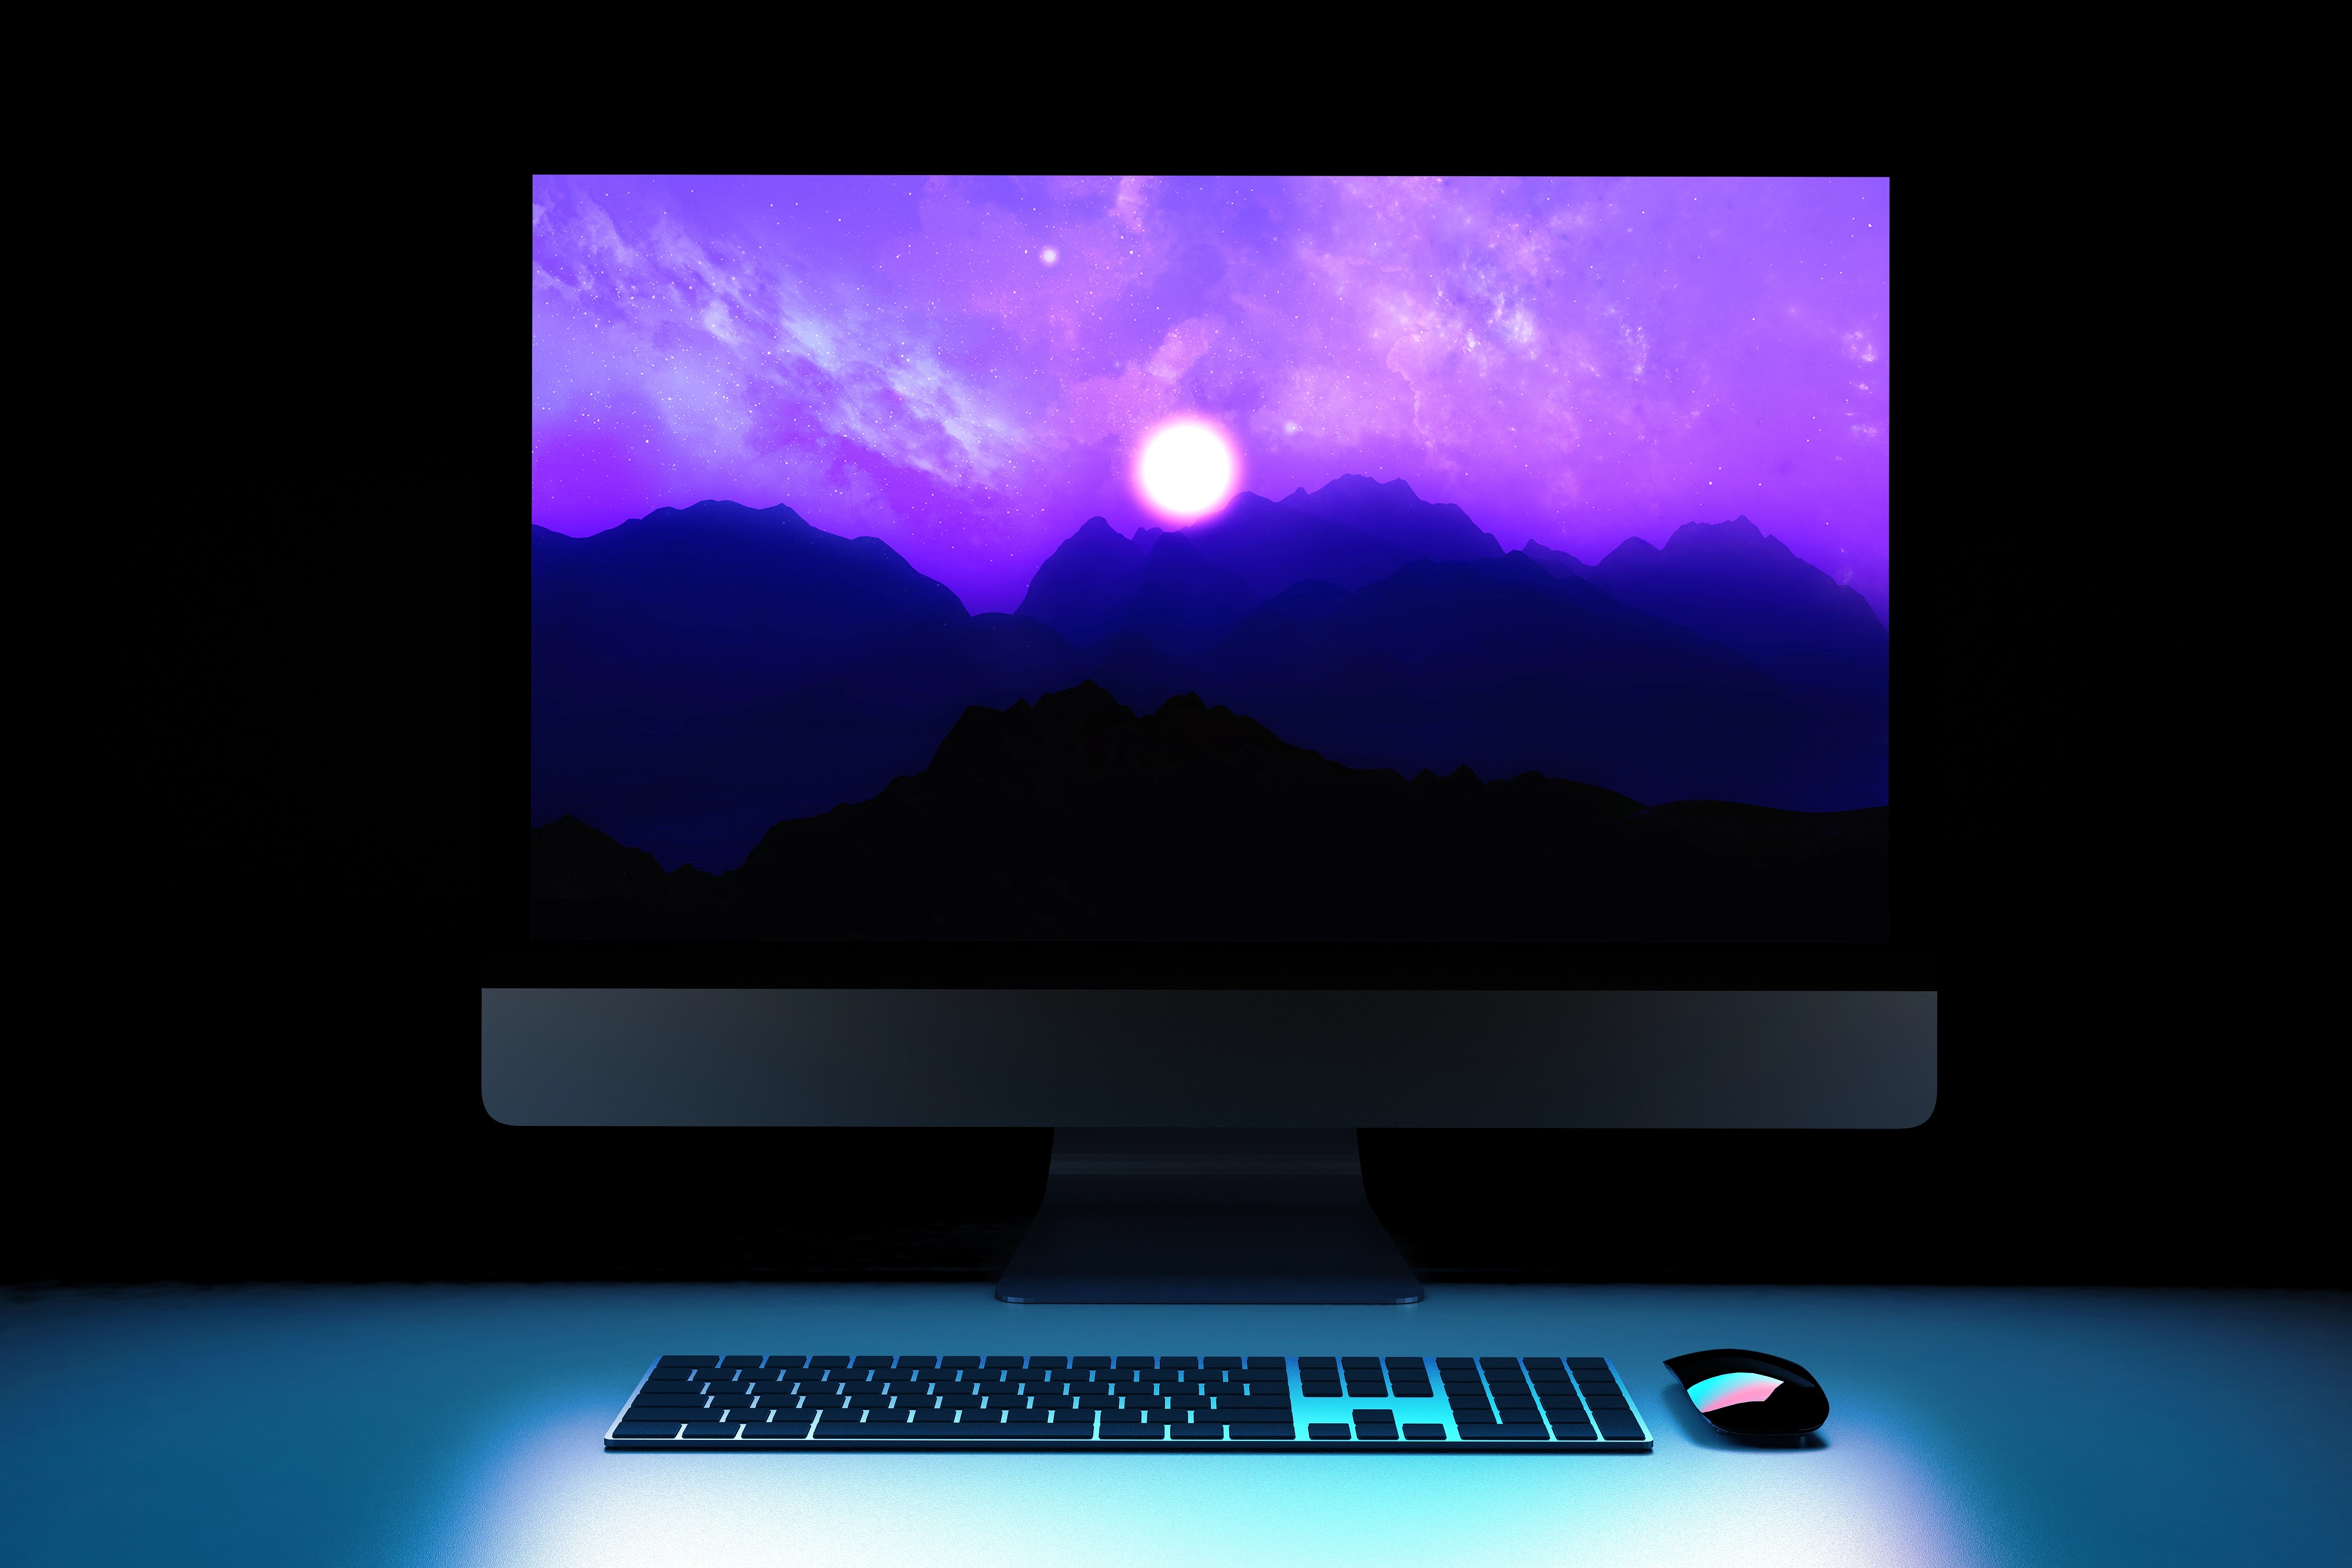 3d render of mountains against a space sky background wallpaper for pc like windows desktop/laptop or Mac